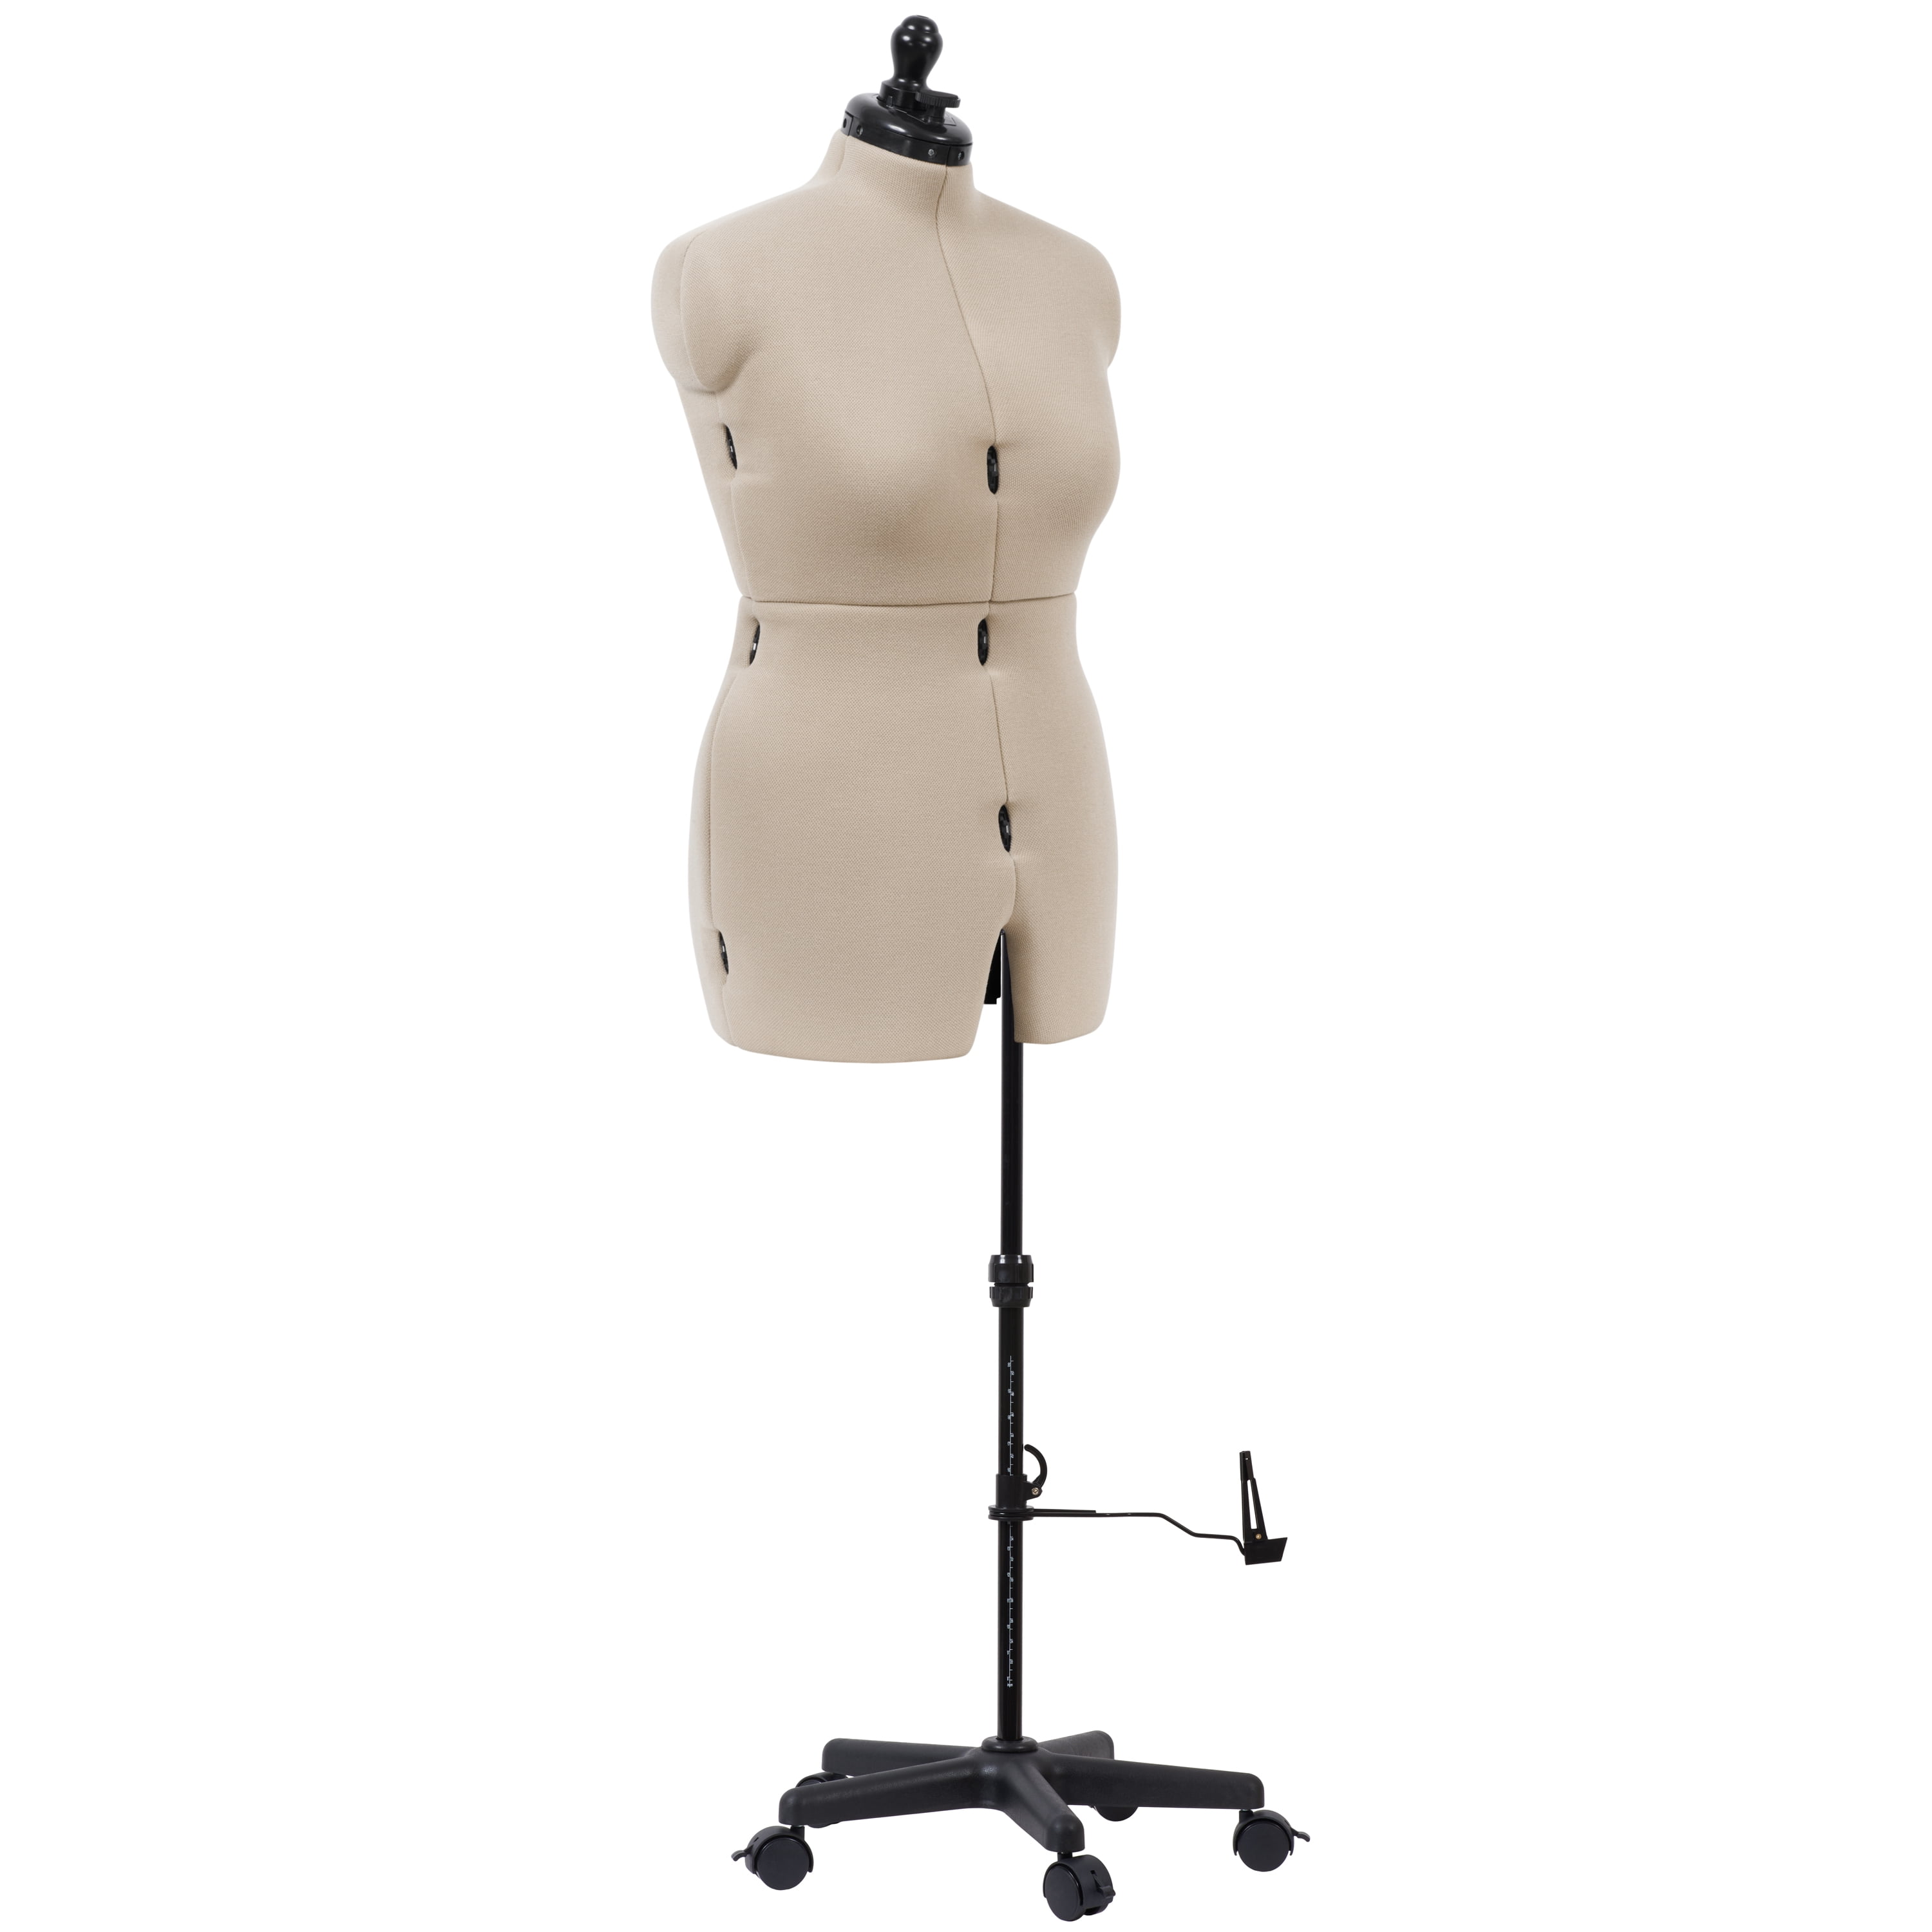 Dritz 20421 Sew-You Dressform With Tri-Pod Stand Adjustable Up To 63” Shoulder 